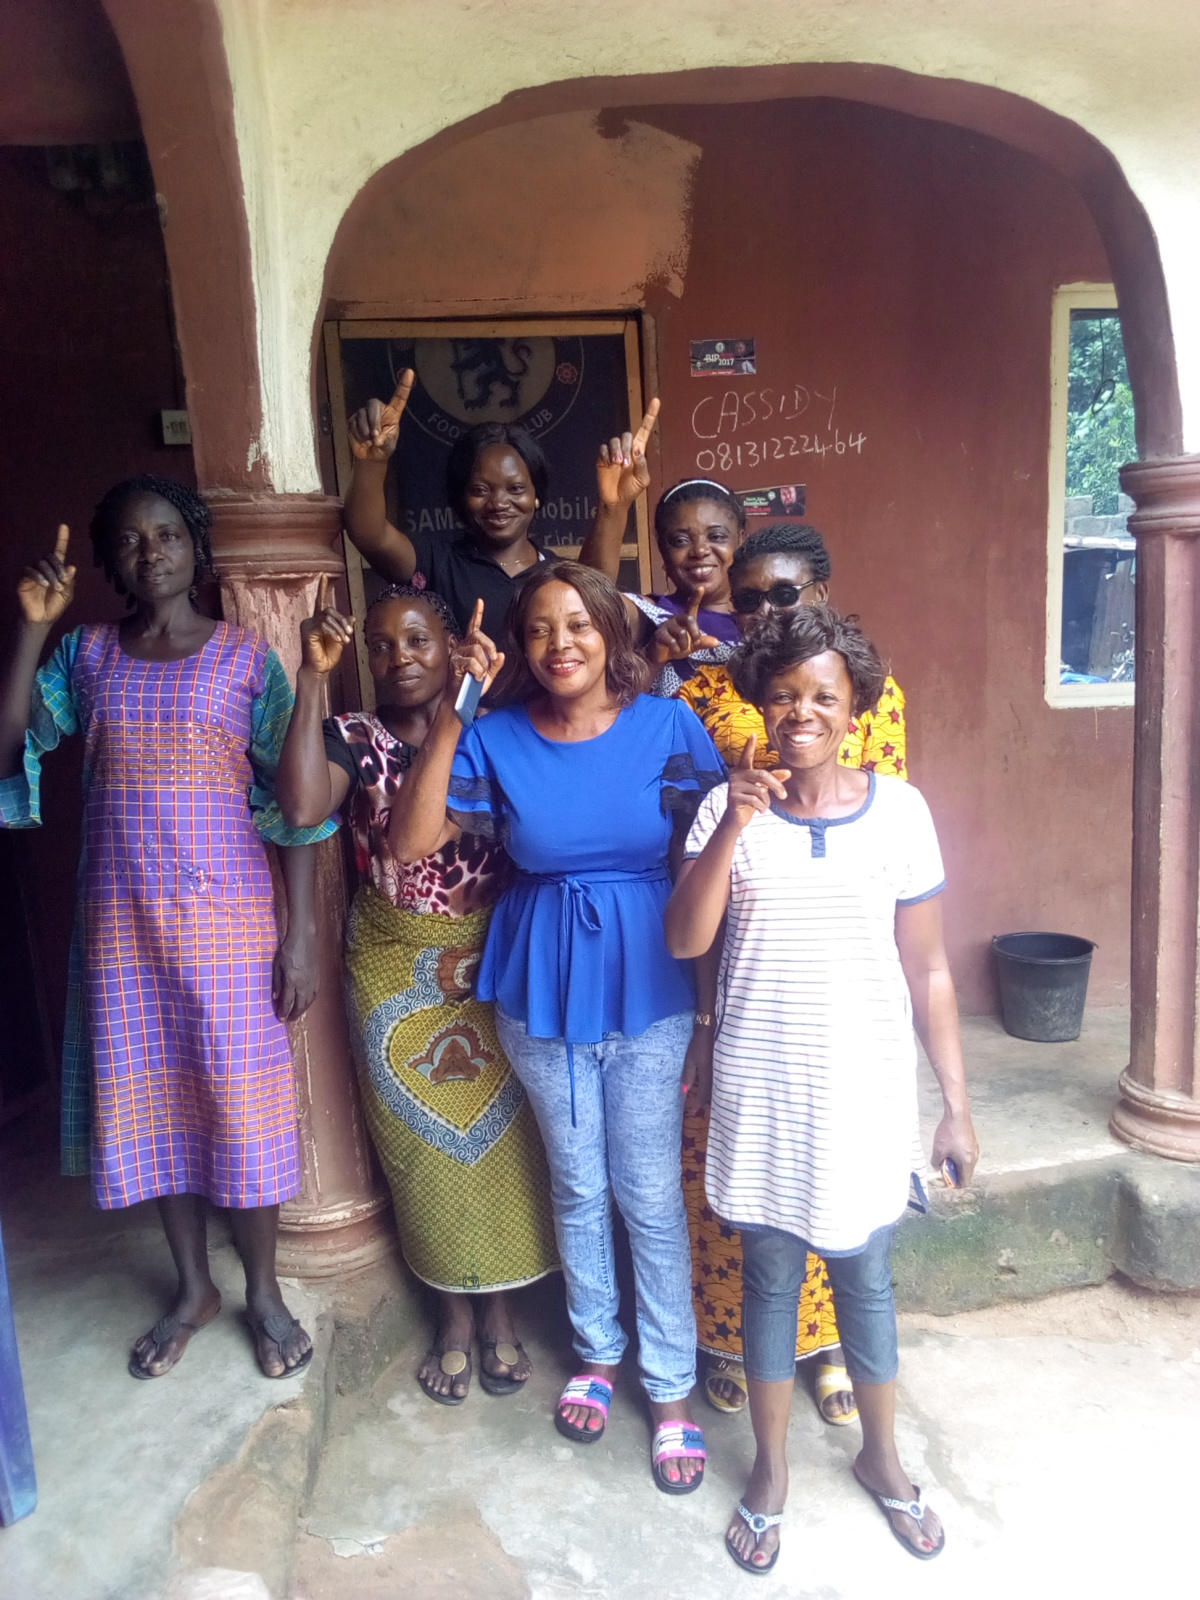 Grassroots Women Journalists in Nigeria (GWJiN) thumps up to take a stand to report issues around them with a gender lens, after the training at Ndok village in Ogoja, Cross River state